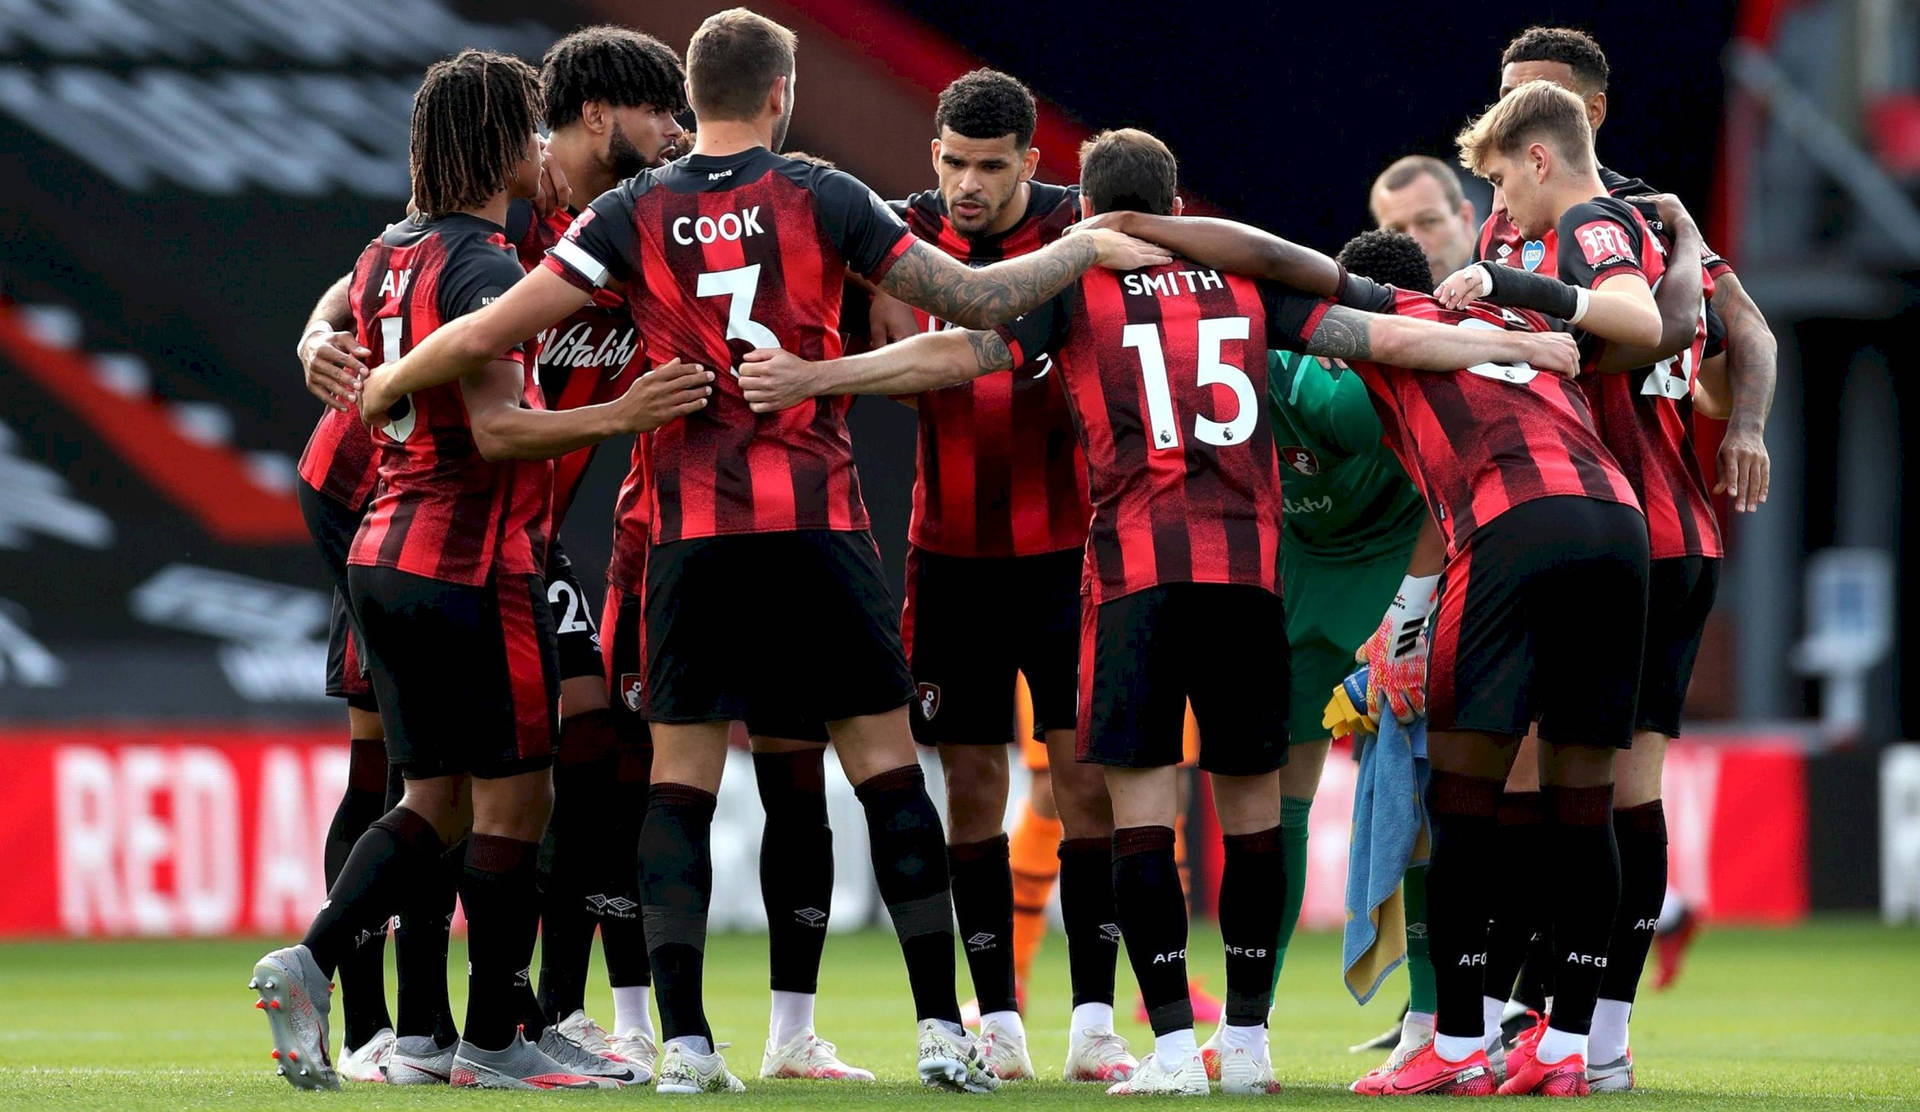 Unified Strength - AFC Bournemouth Team Huddle Wallpaper